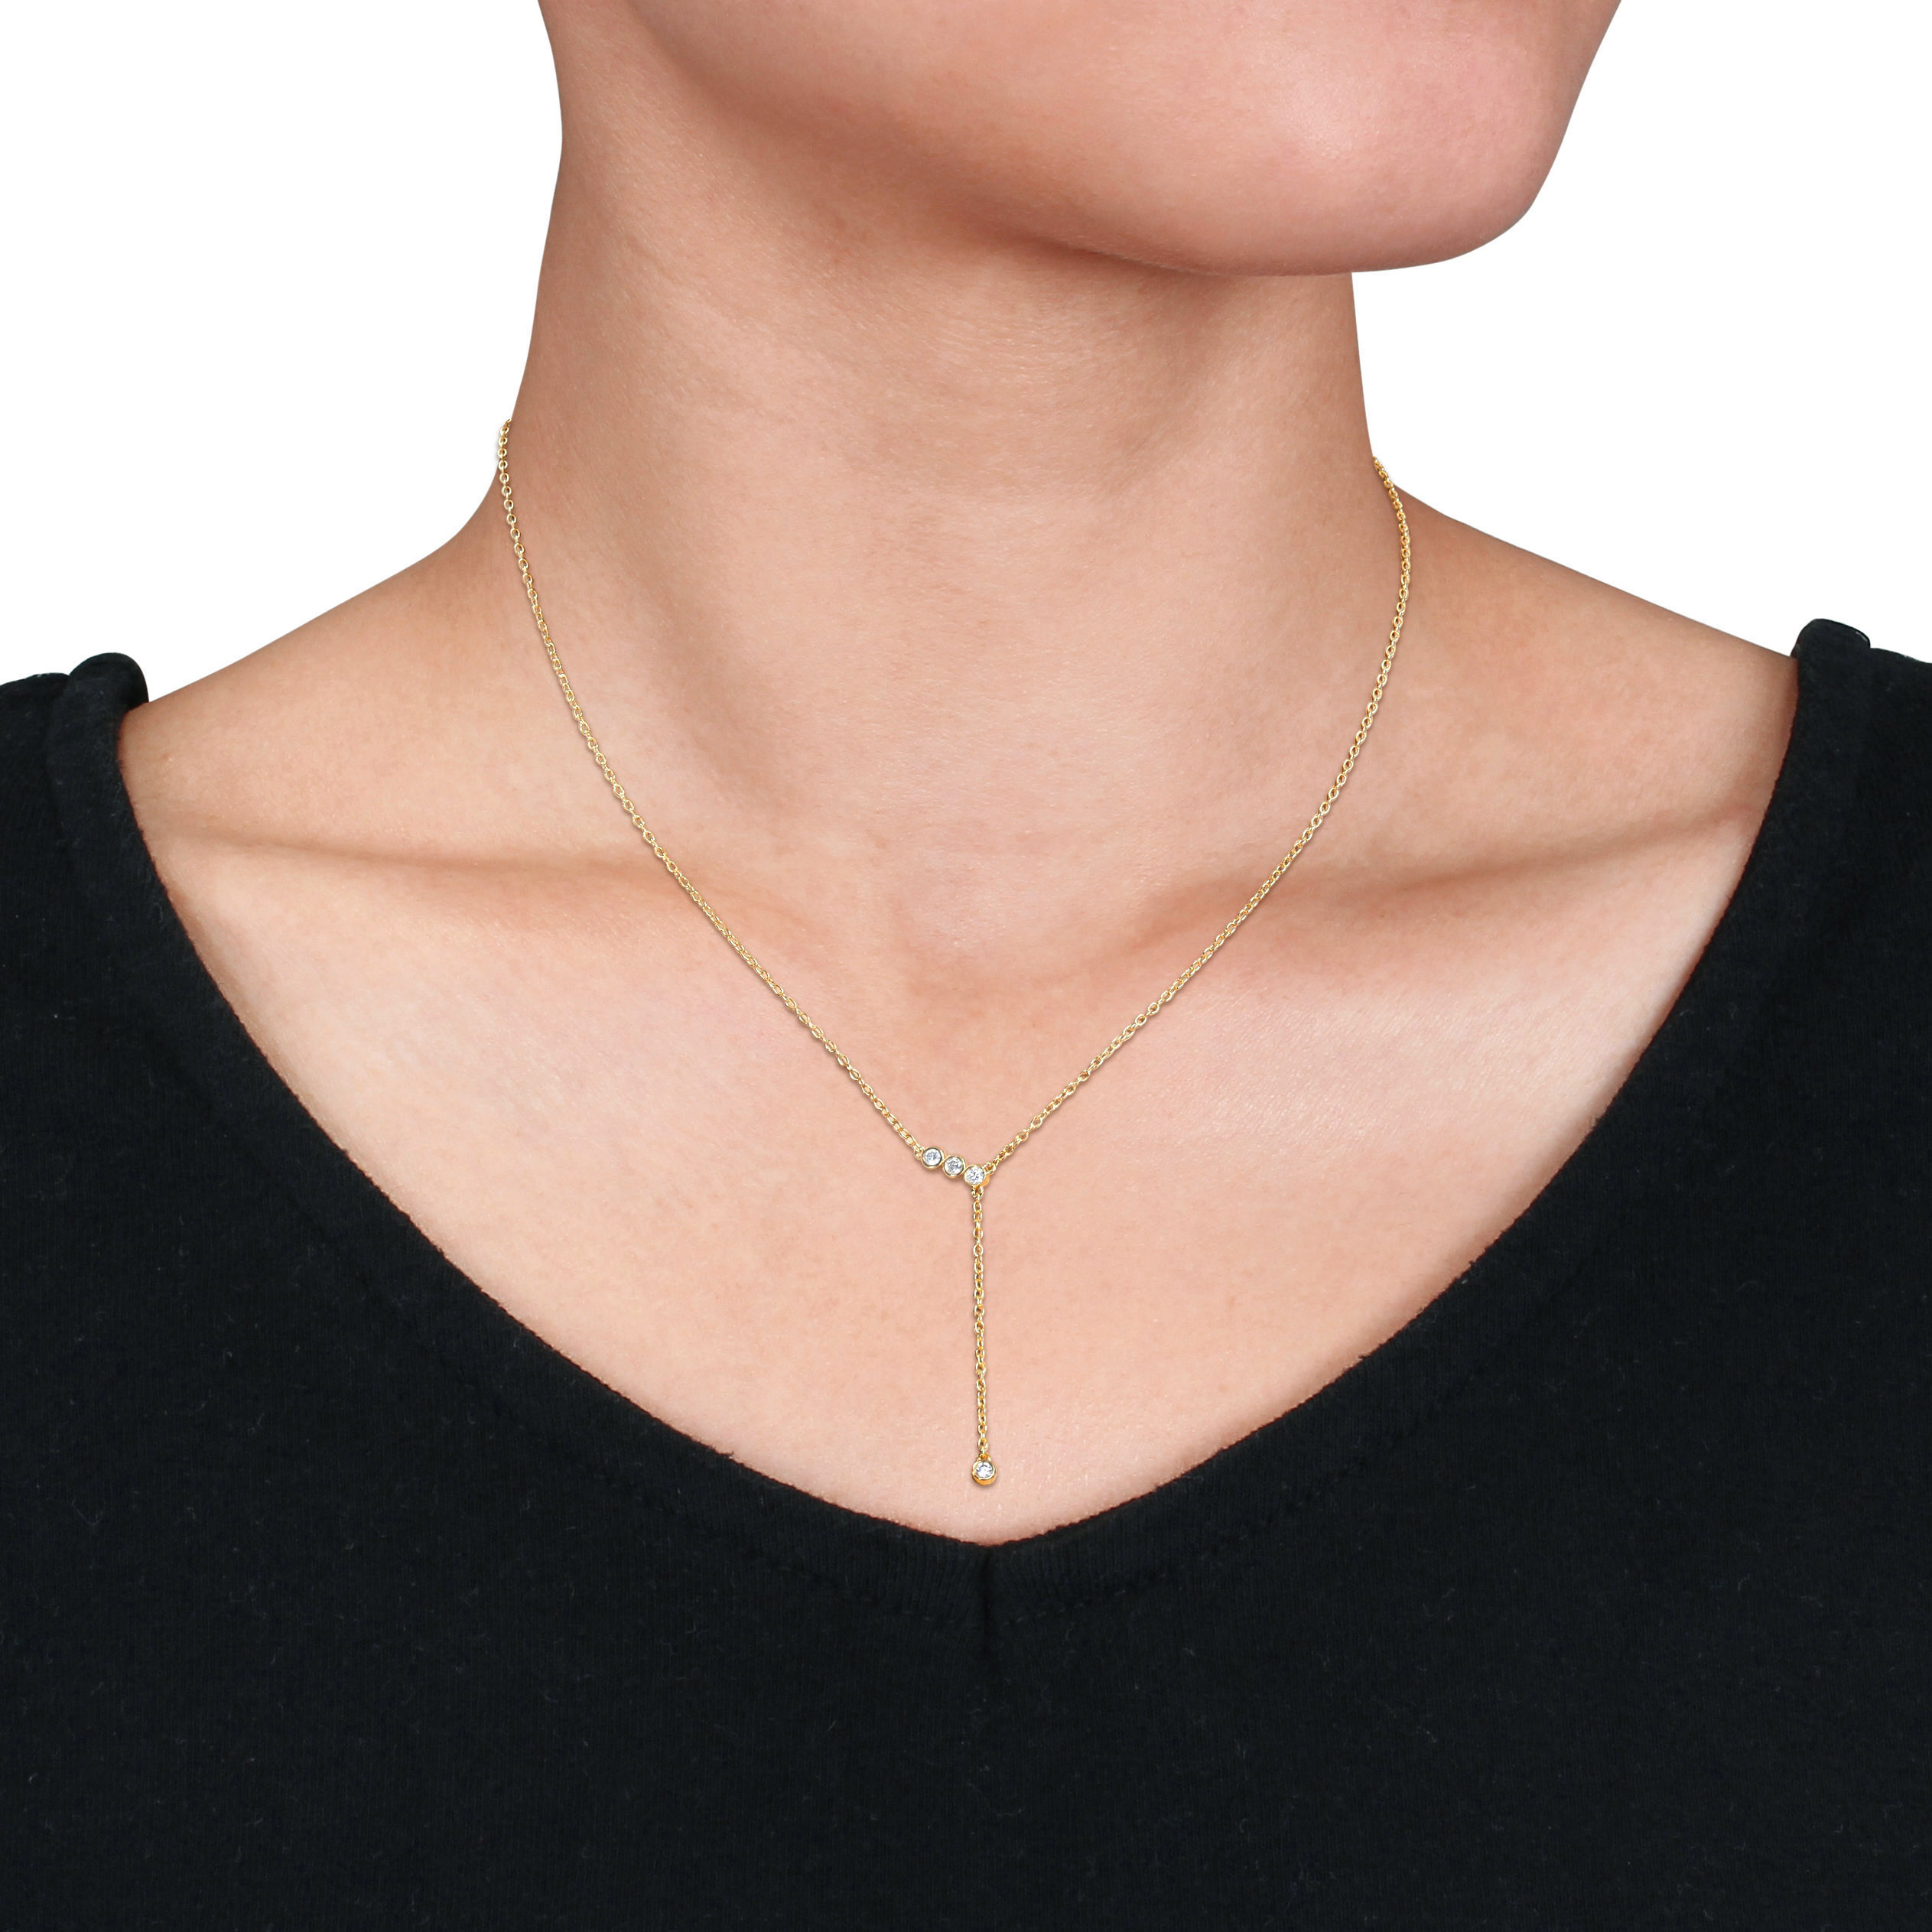 1/8 CT TGW Lab Created Diamond Lariat Necklace in 18k Yellow Gold Plated Sterling Silver - 17 in.